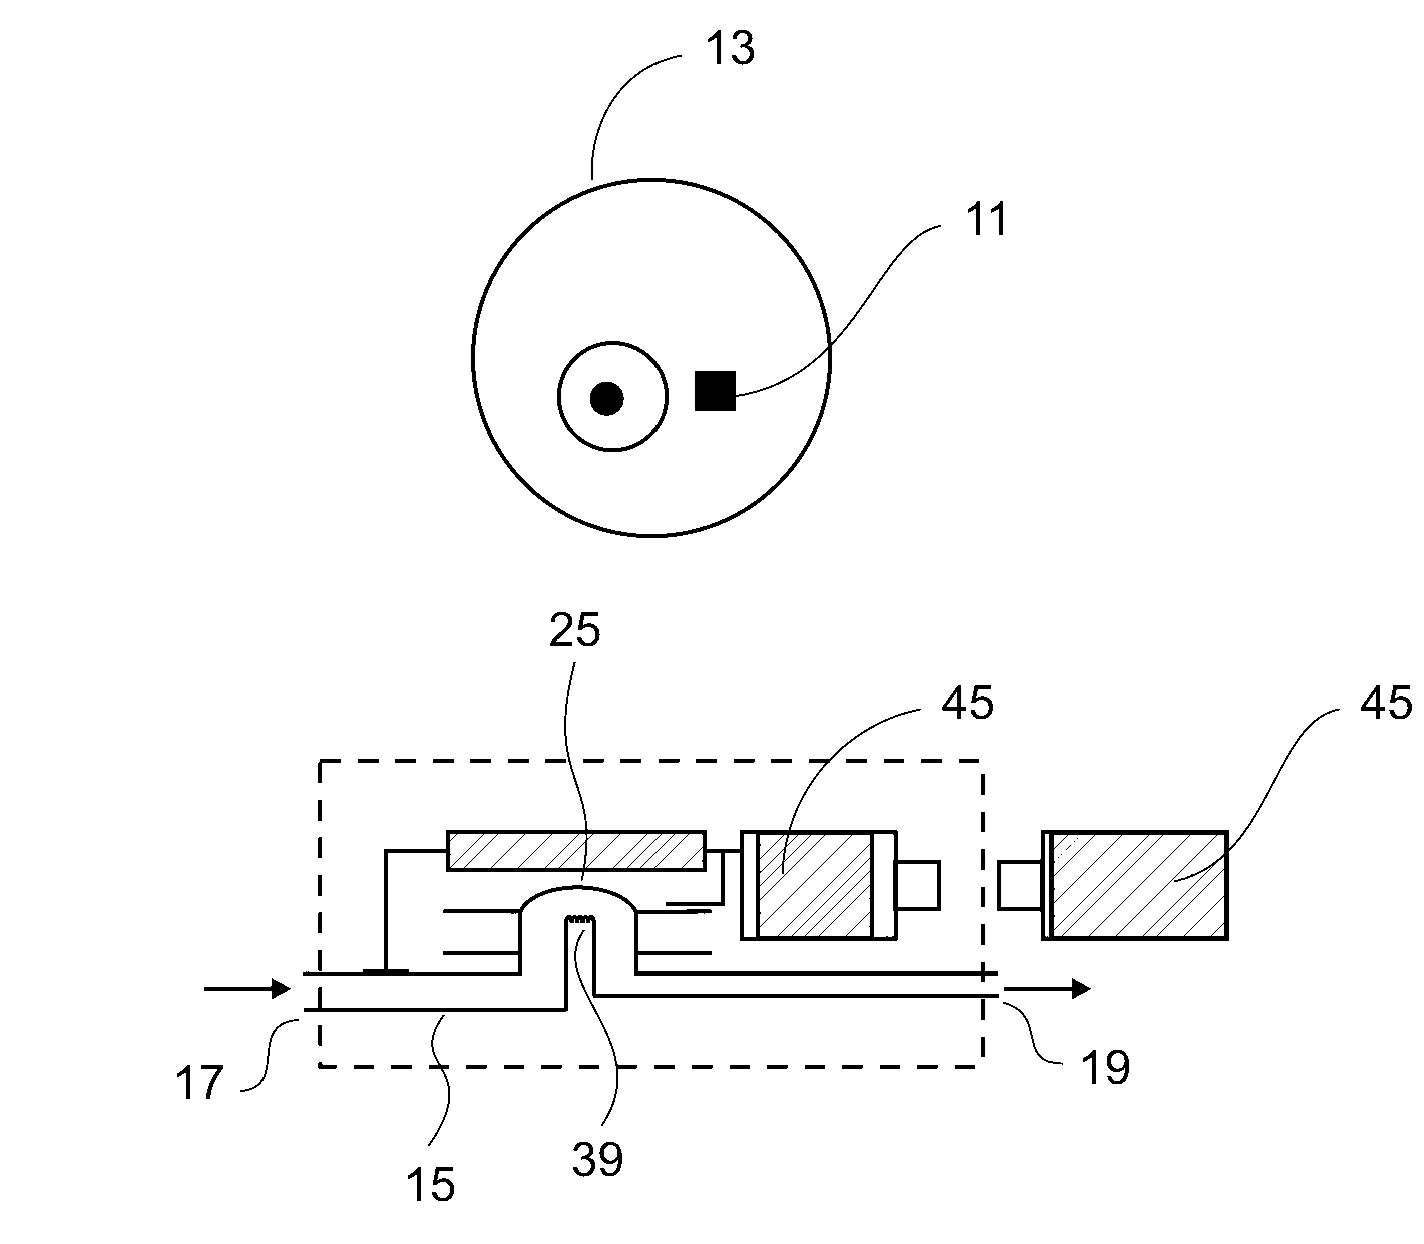 Implantable ocular microapparatus to ameliorate glaucoma or an ocular overpressure causing disease